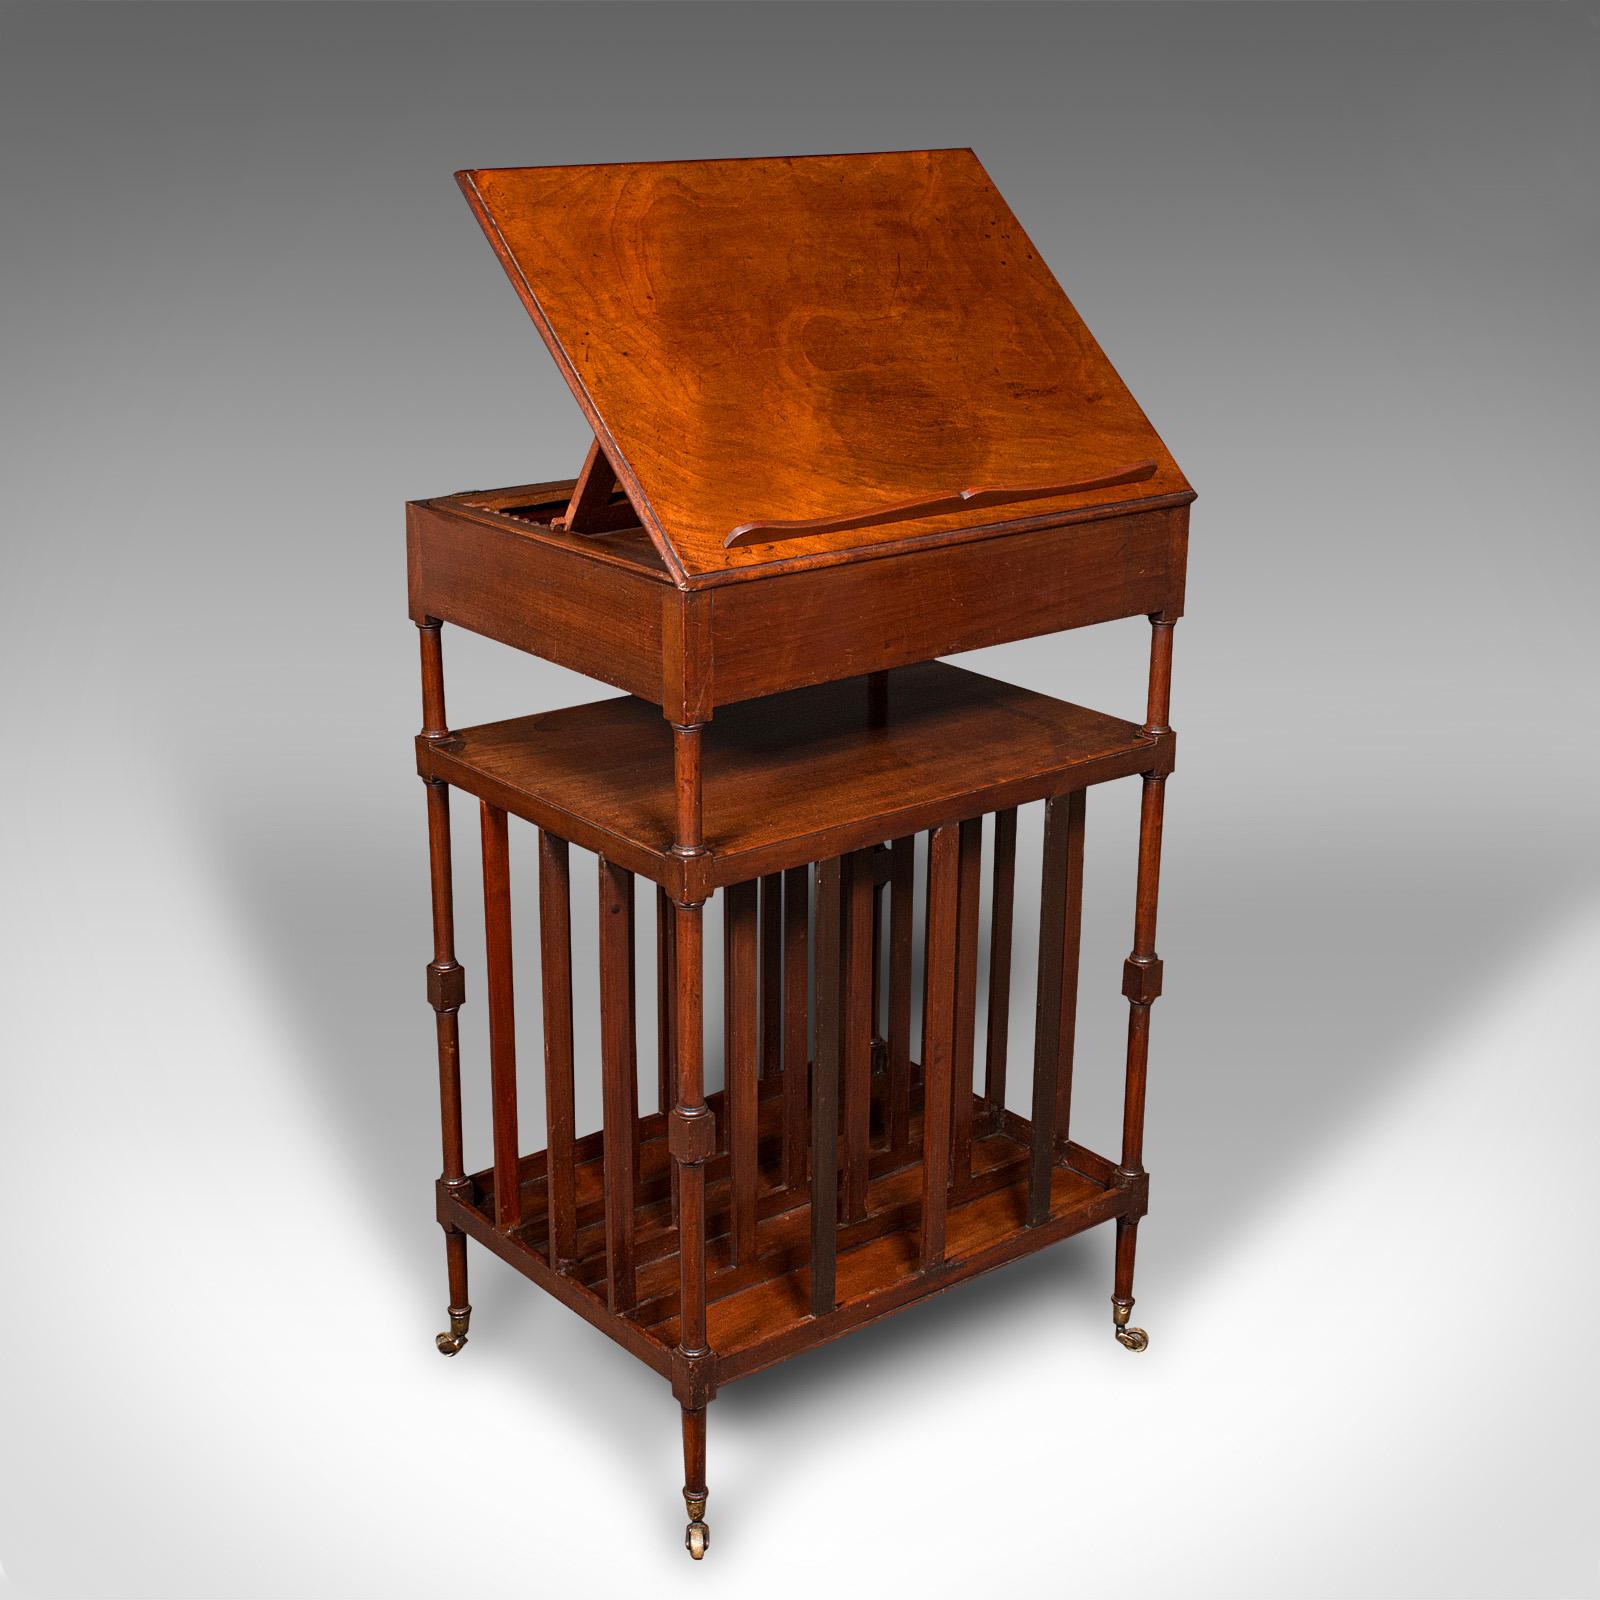 This is an antique articulated reading table. An English, walnut Canterbury lectern with riser, dating to the Regency period, circa 1820.

Articulates through several positions, with useful storage below
Displays a desirable aged patina and in